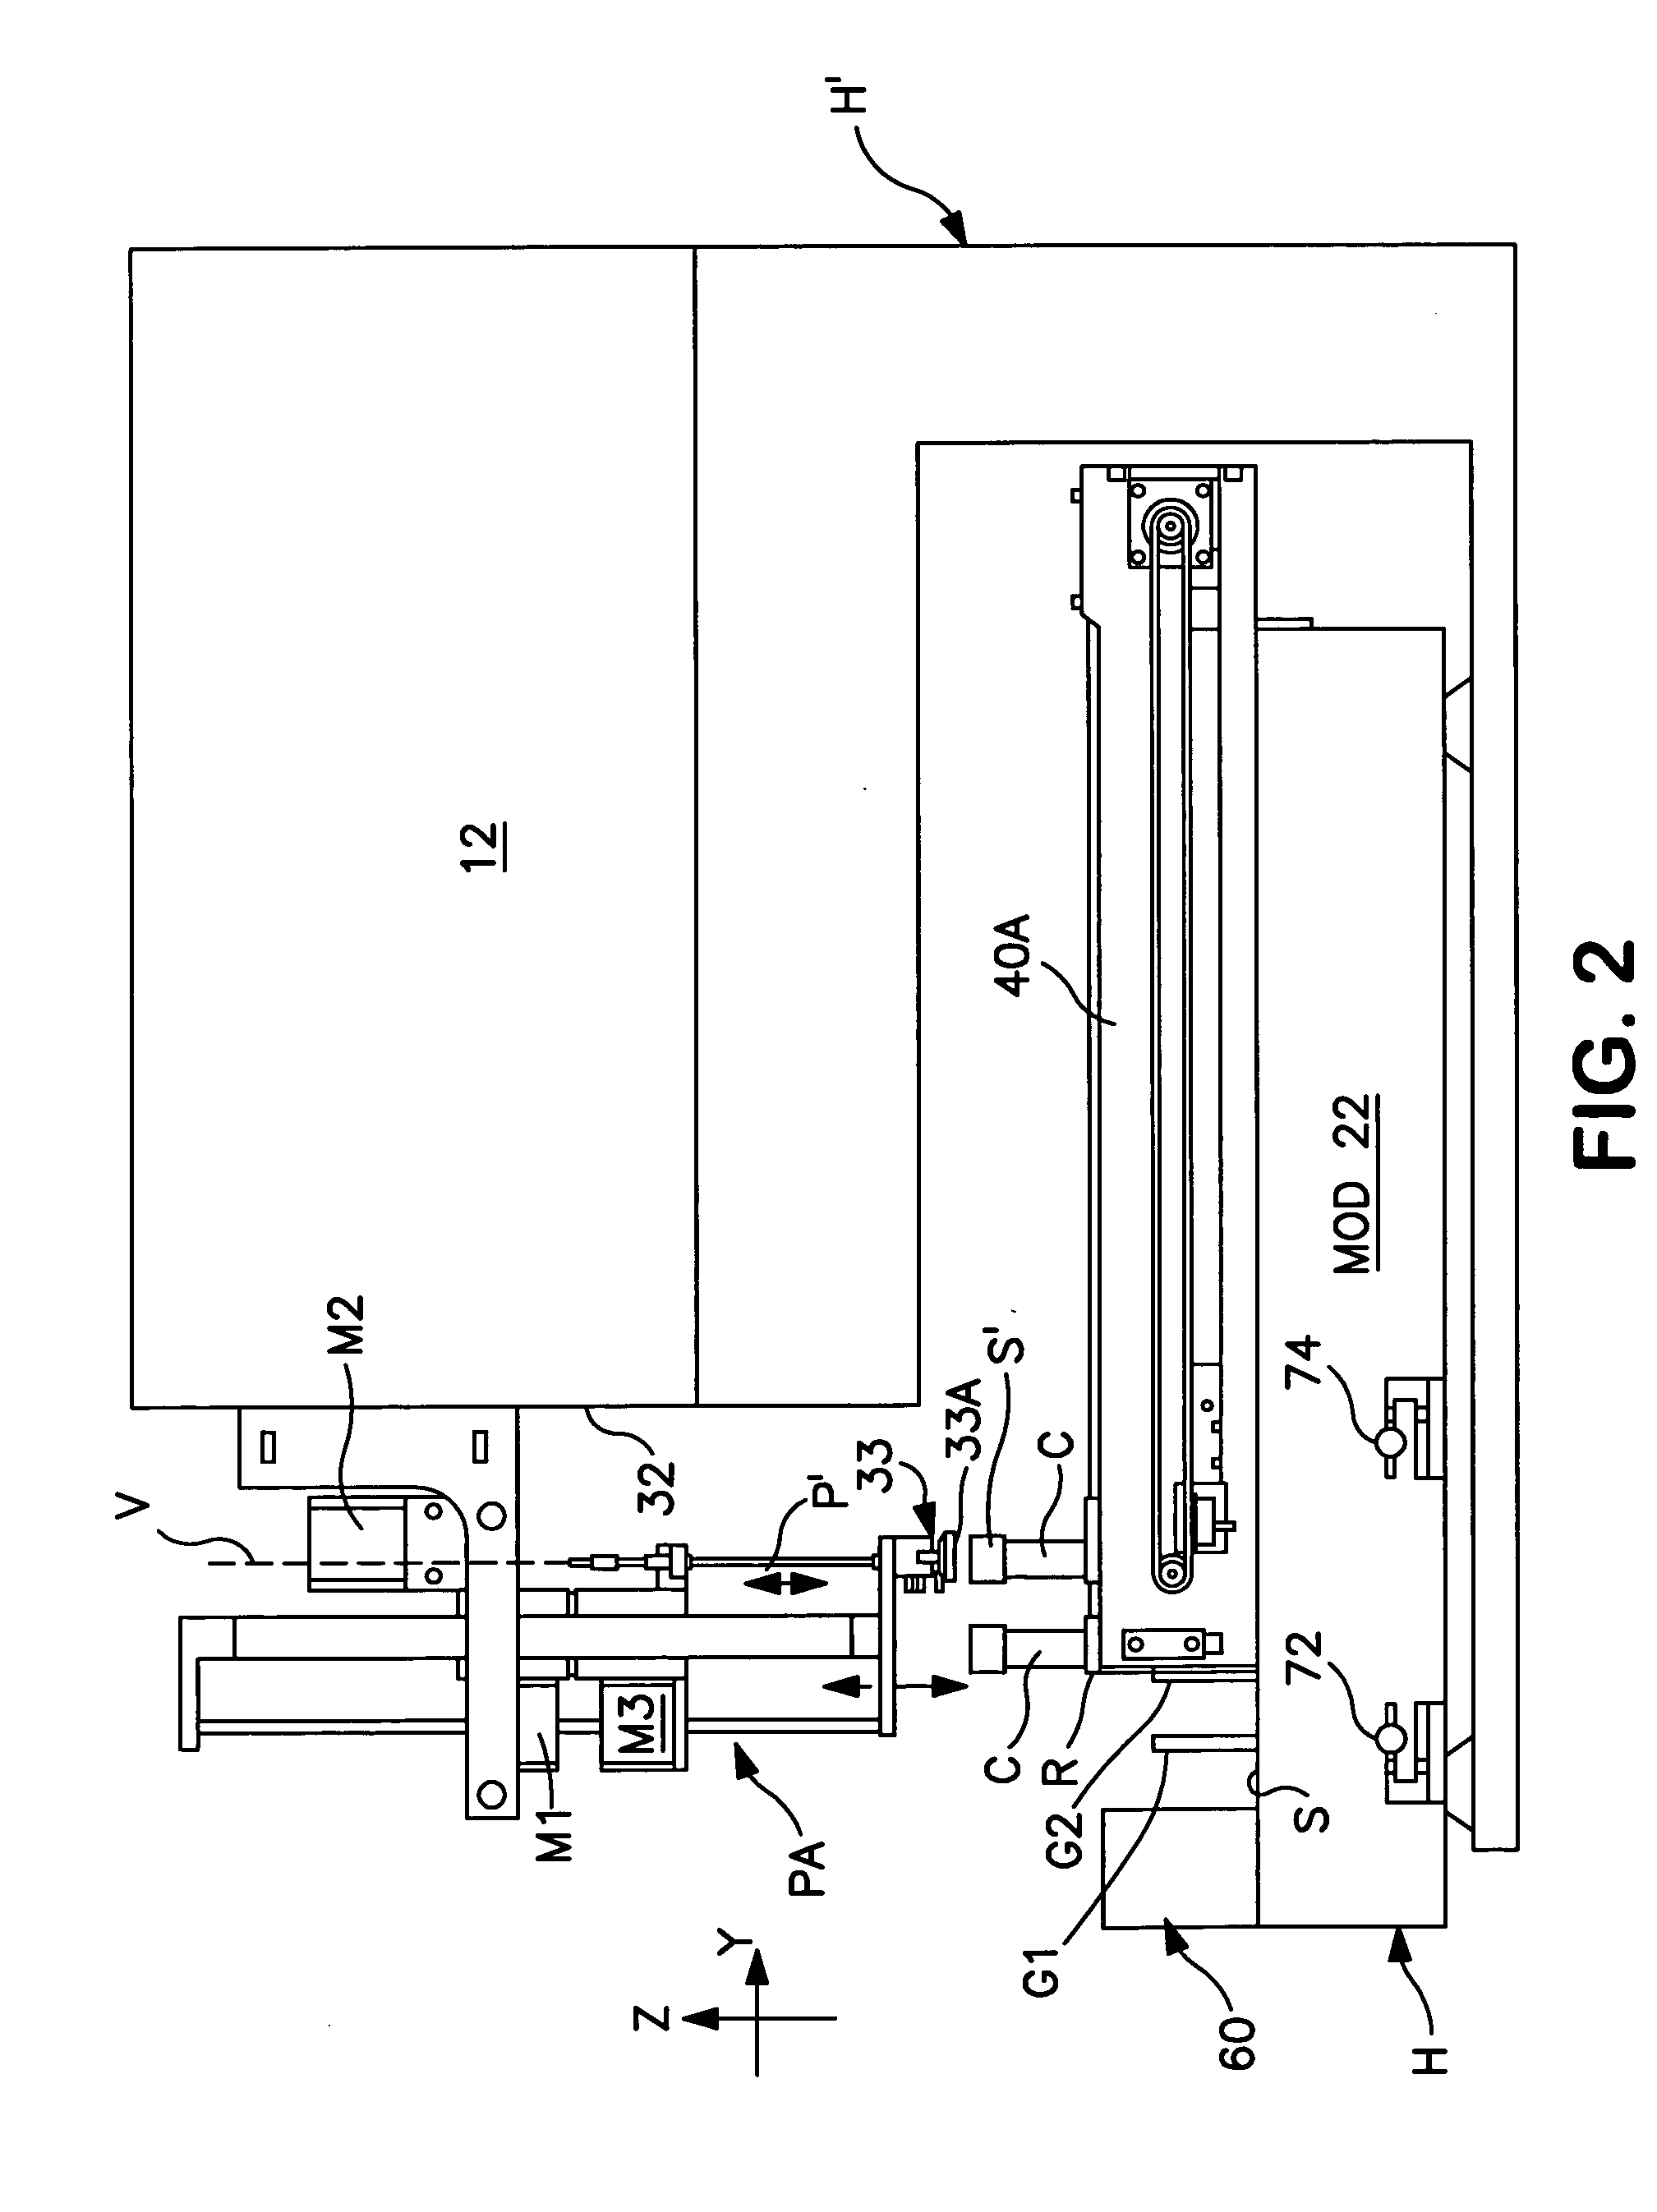 Specimen-transport module for a multi-instrument clinical workcell